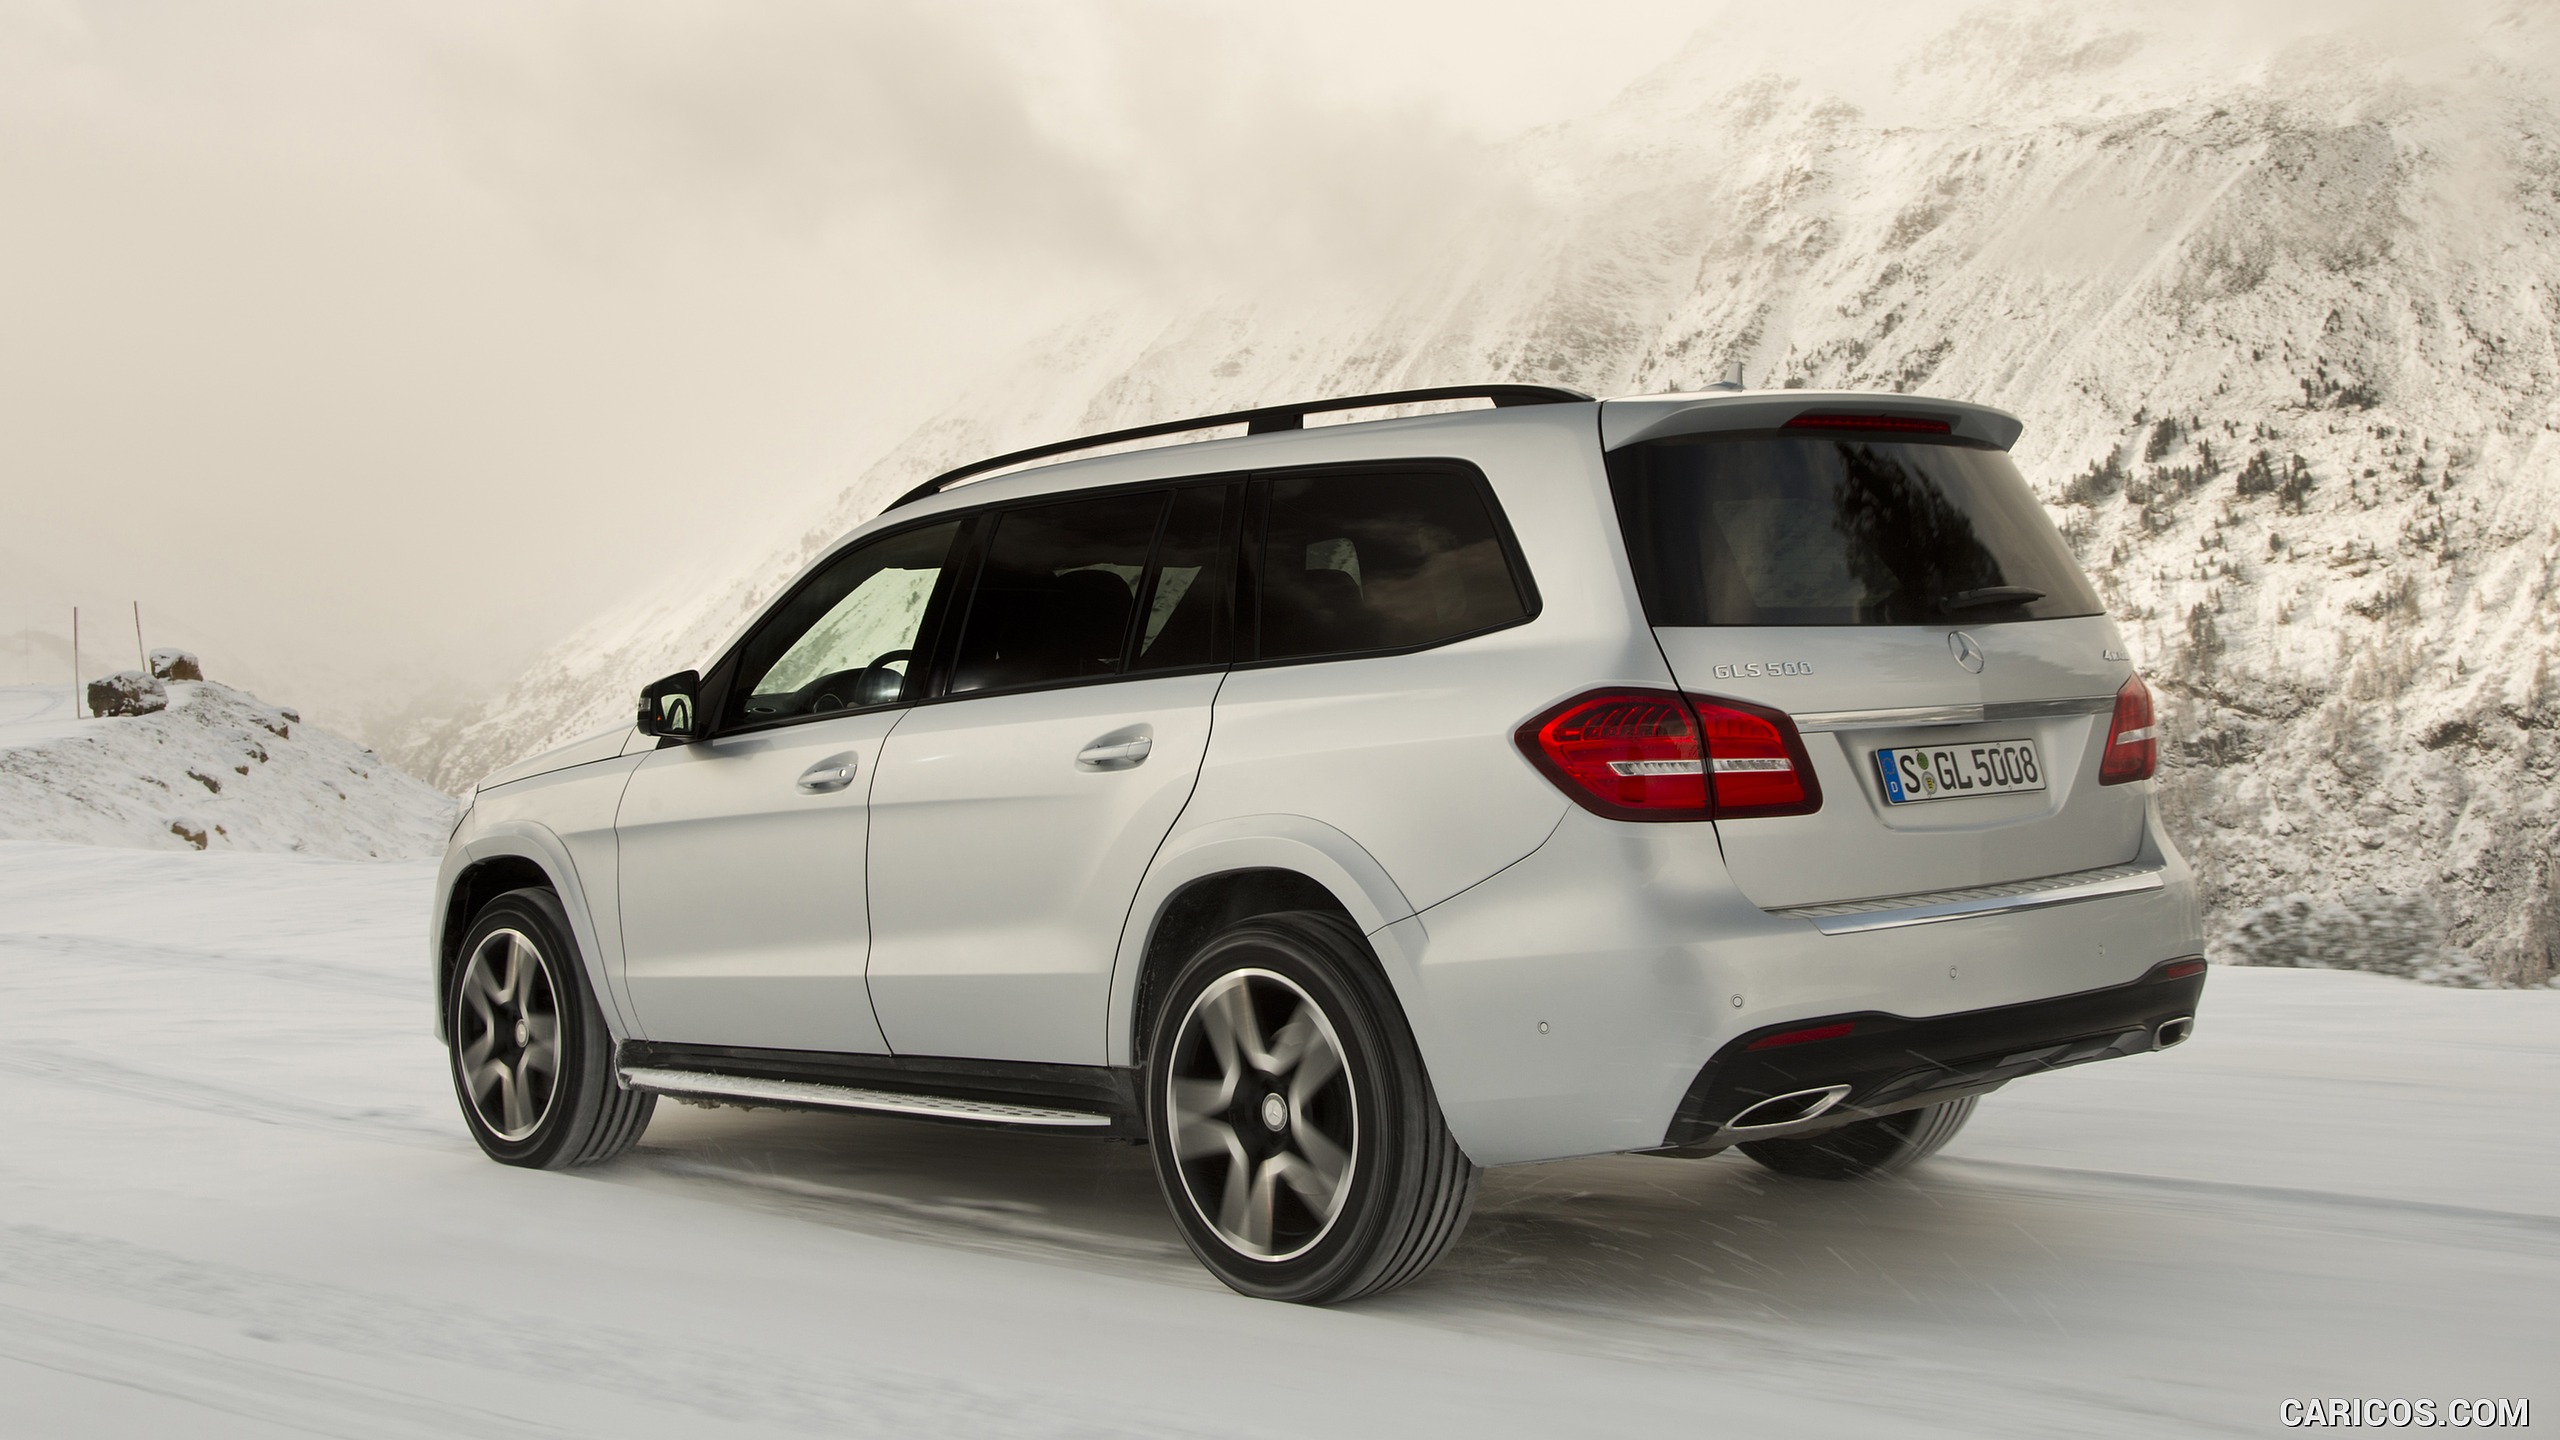 2017 Mercedes-Benz GLS 500 4MATIC AMG Line in Snow - Rear, #134 of 255